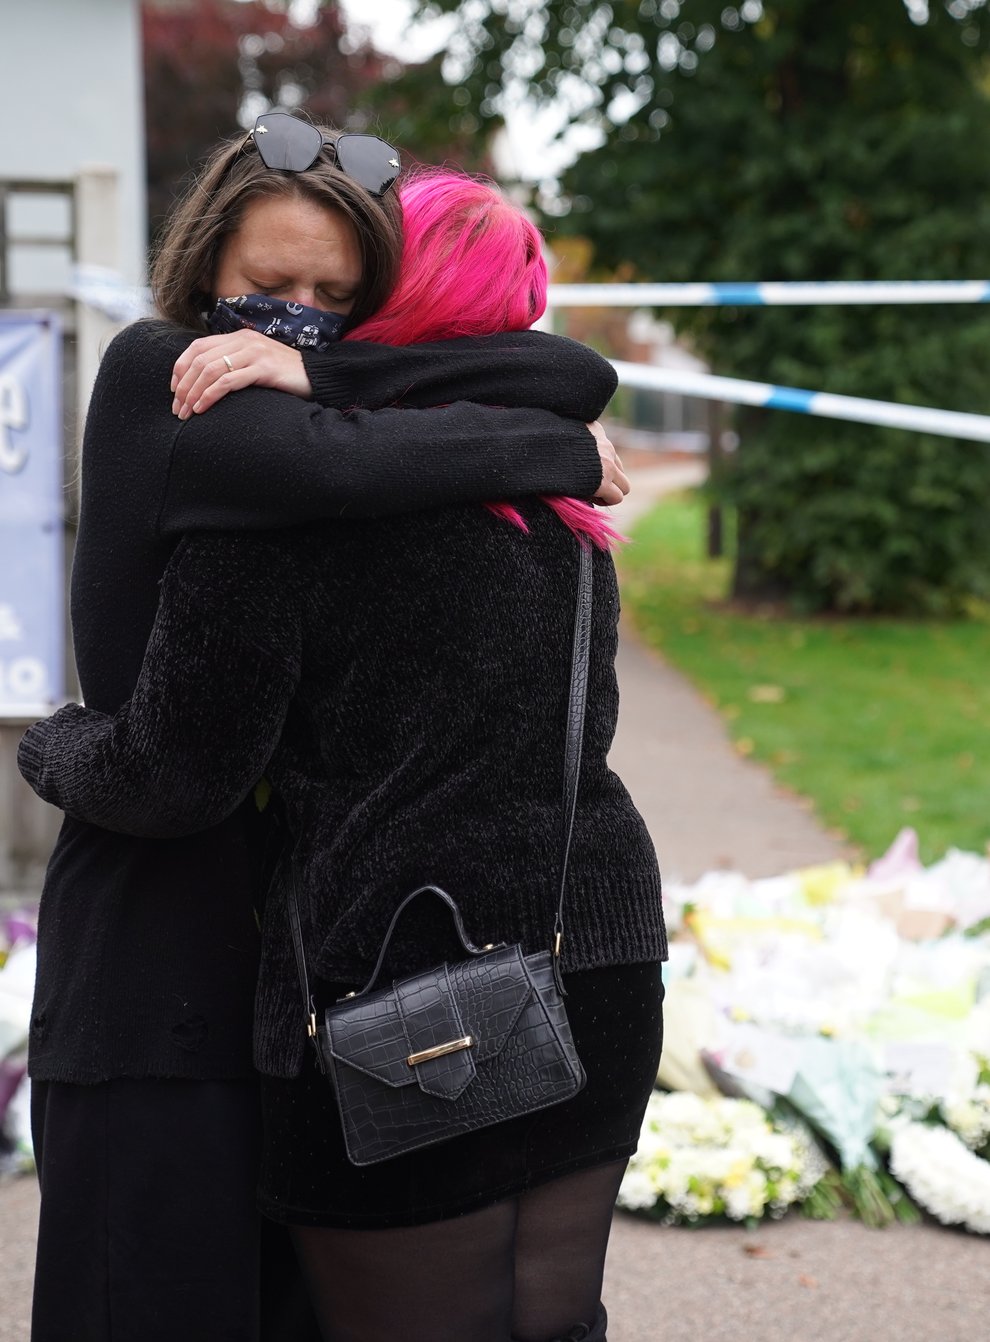 People hug at the scene near Belfairs Methodist Church in Leigh-on-Sea, Essex, where Conservative MP Sir David Amess was killed (Kirsty O’Connor/PA)